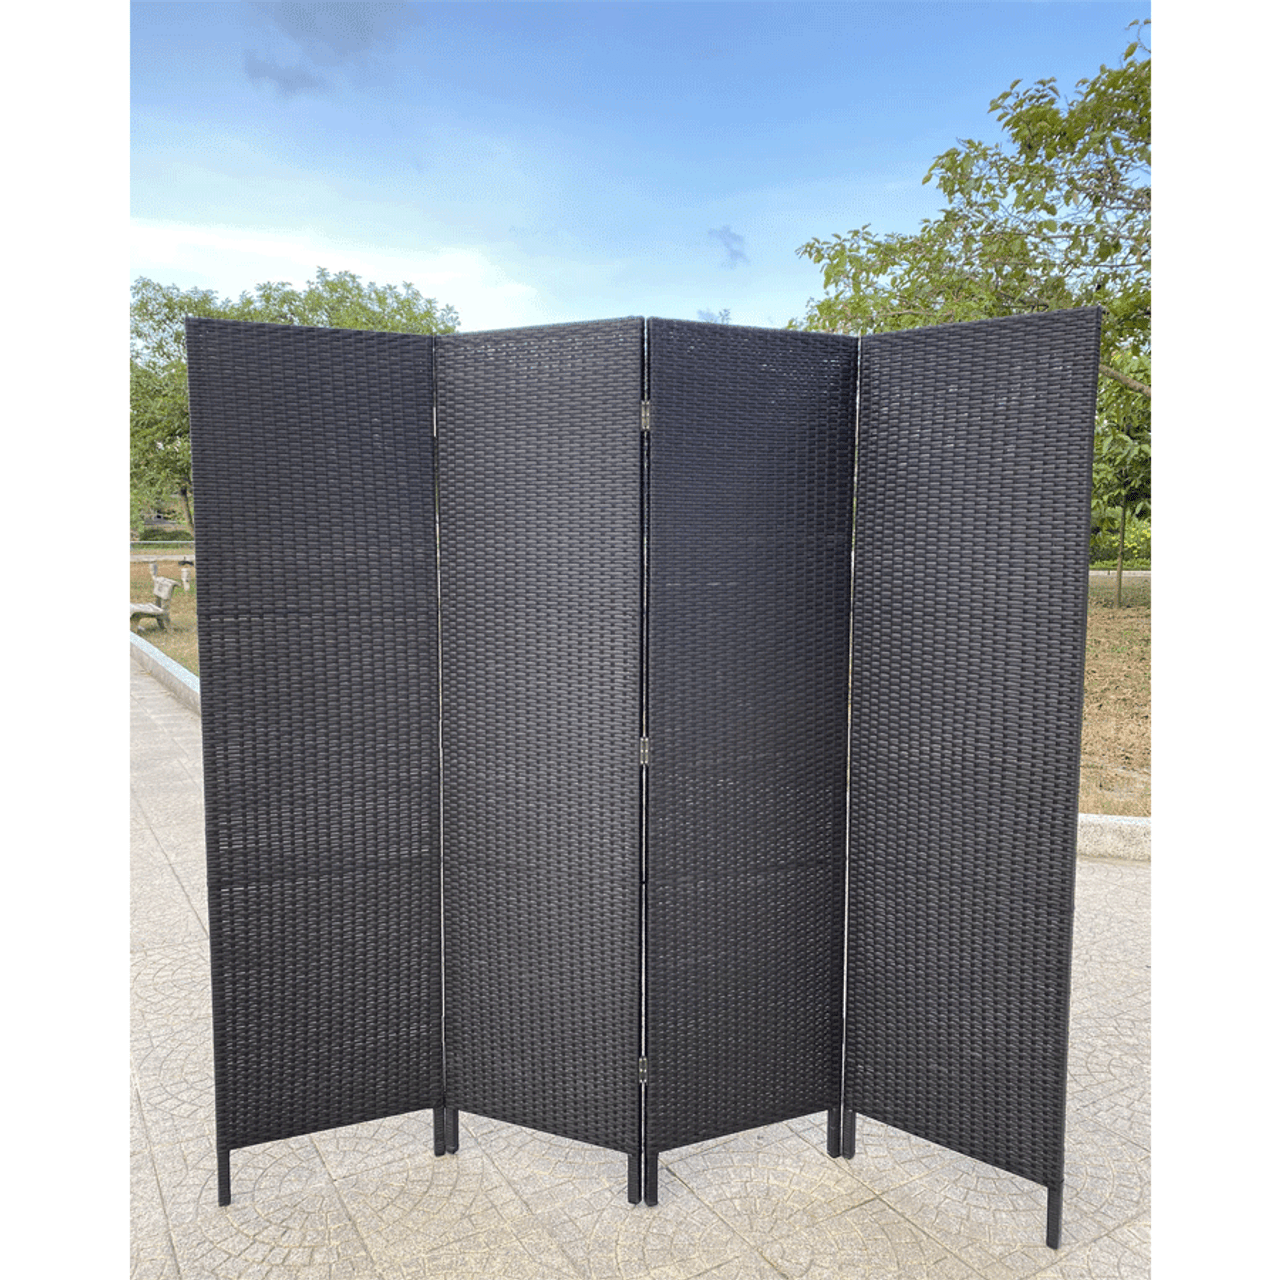 3 And 4 Panels Patio Outdoor Room Screen Divider Legacy Decor